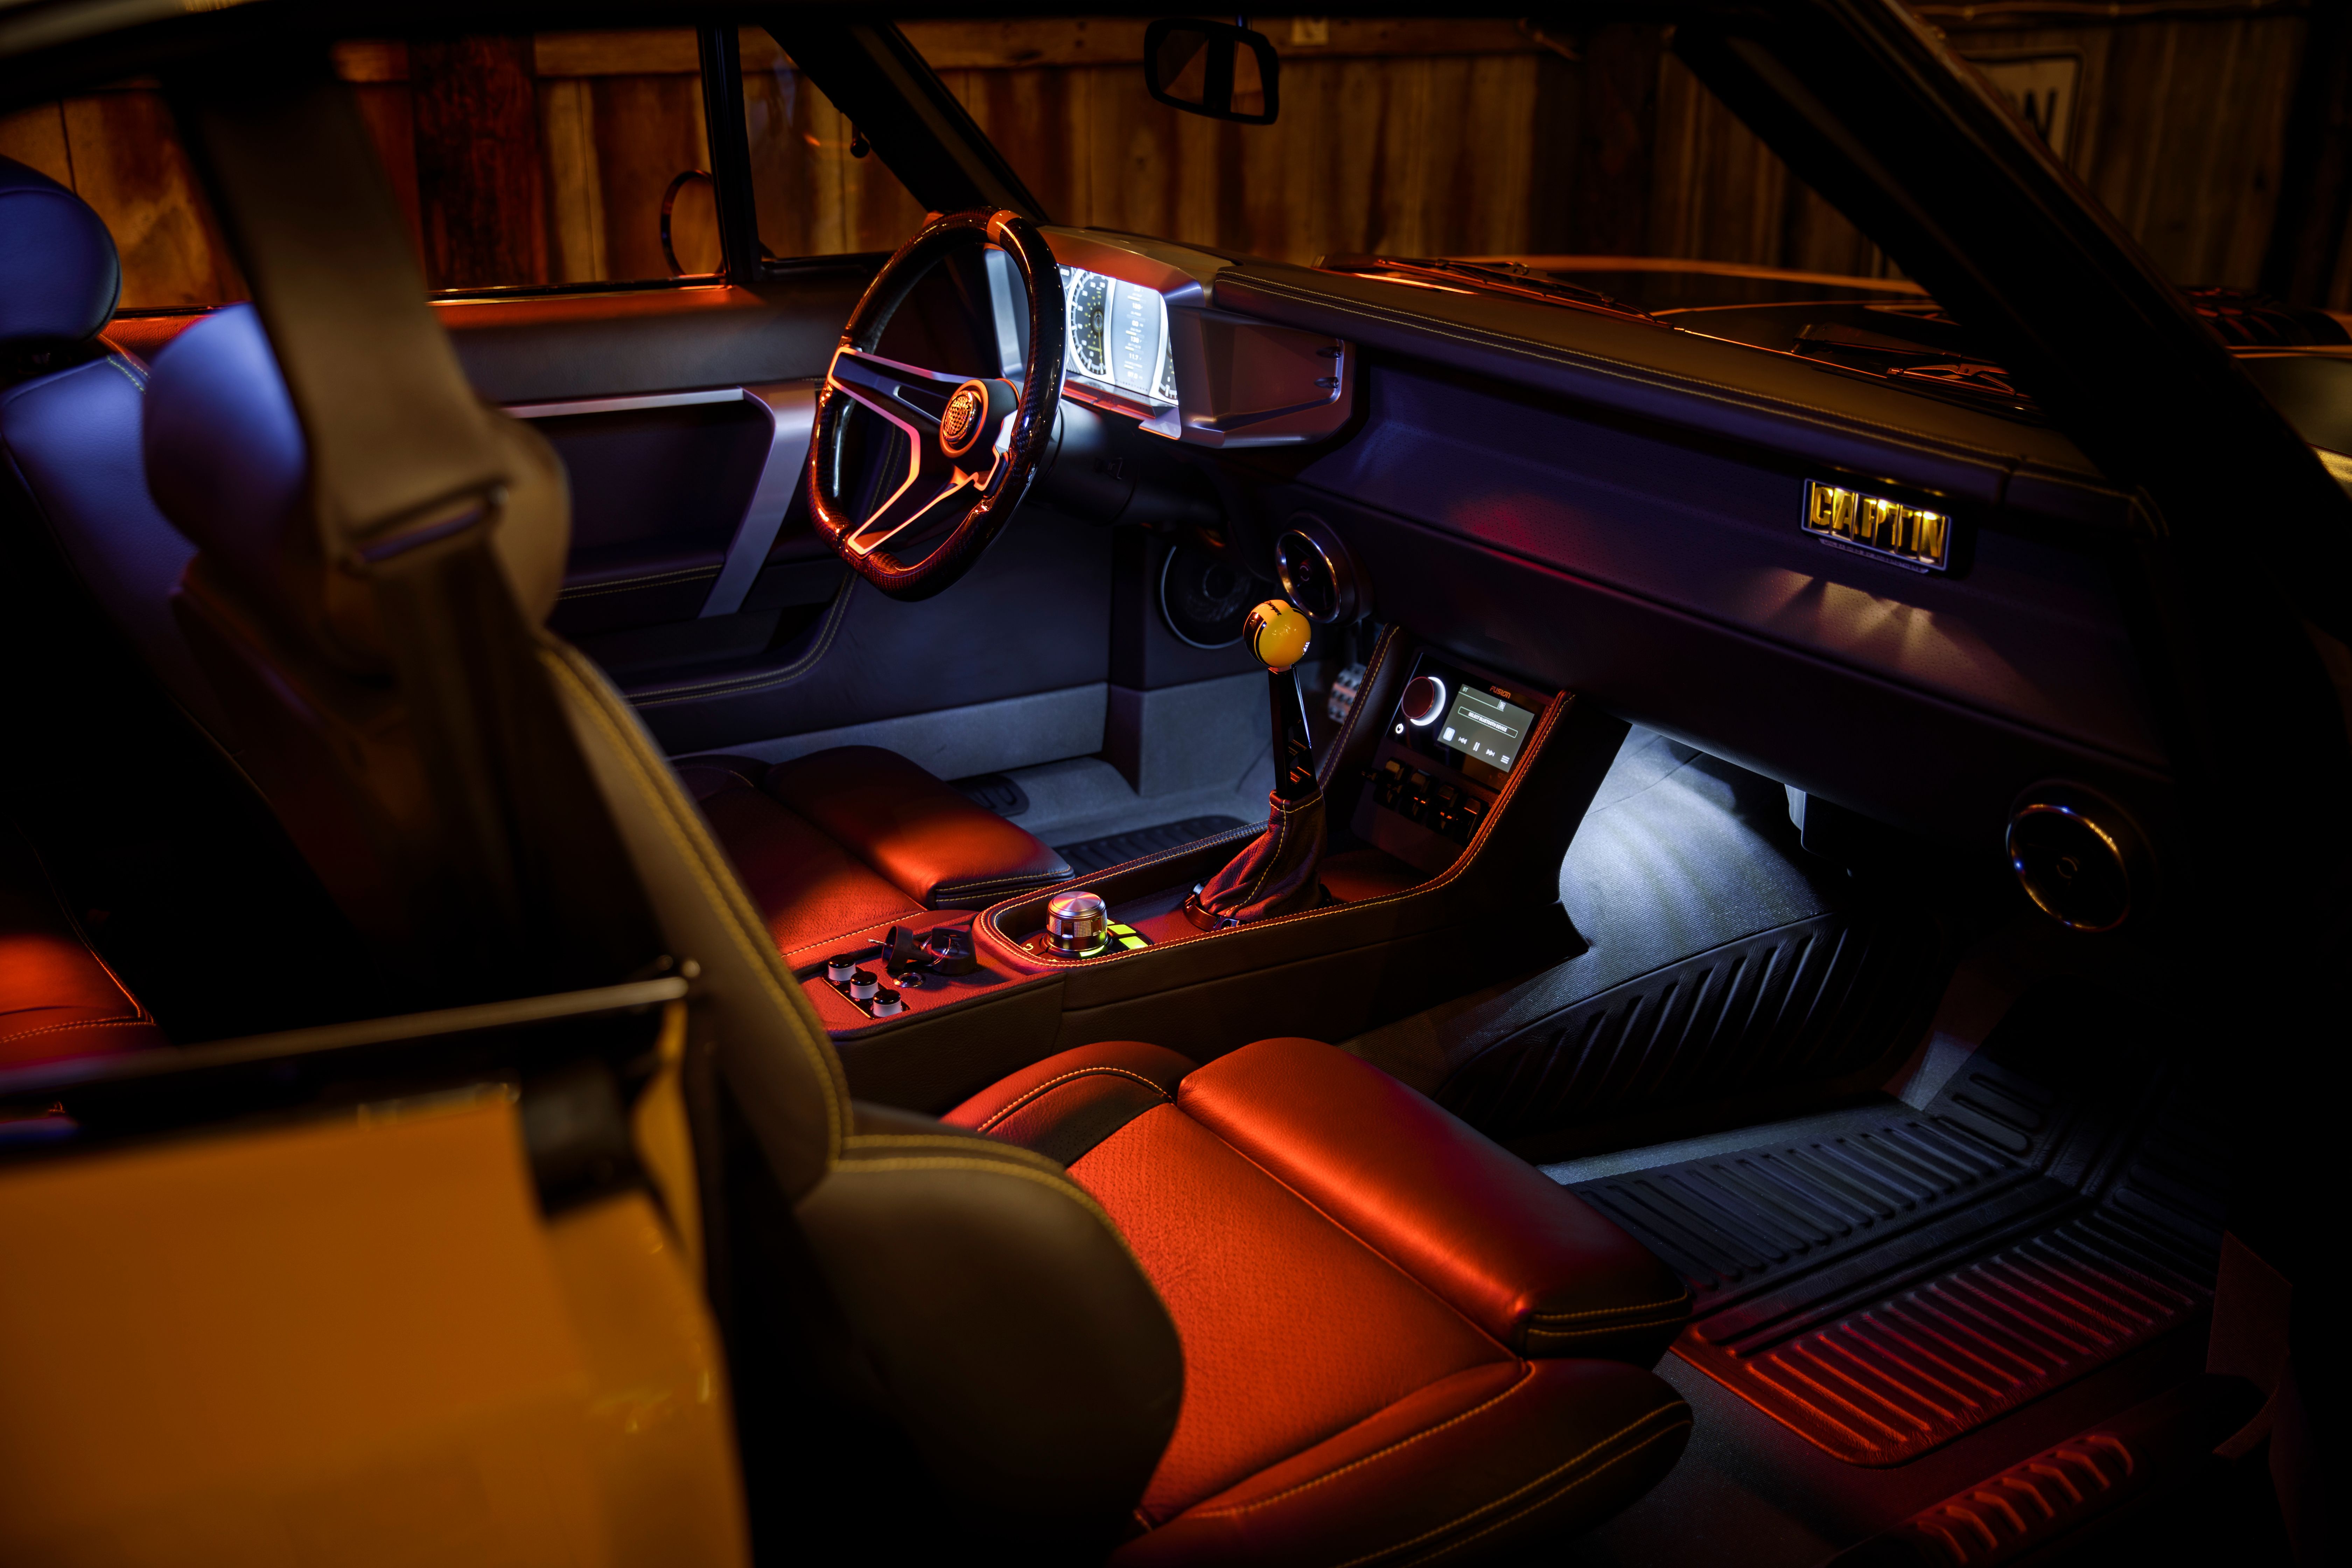 2022 1969 Dodge Charger Captiv by Ringbrothers Makes A Great Car Even Better